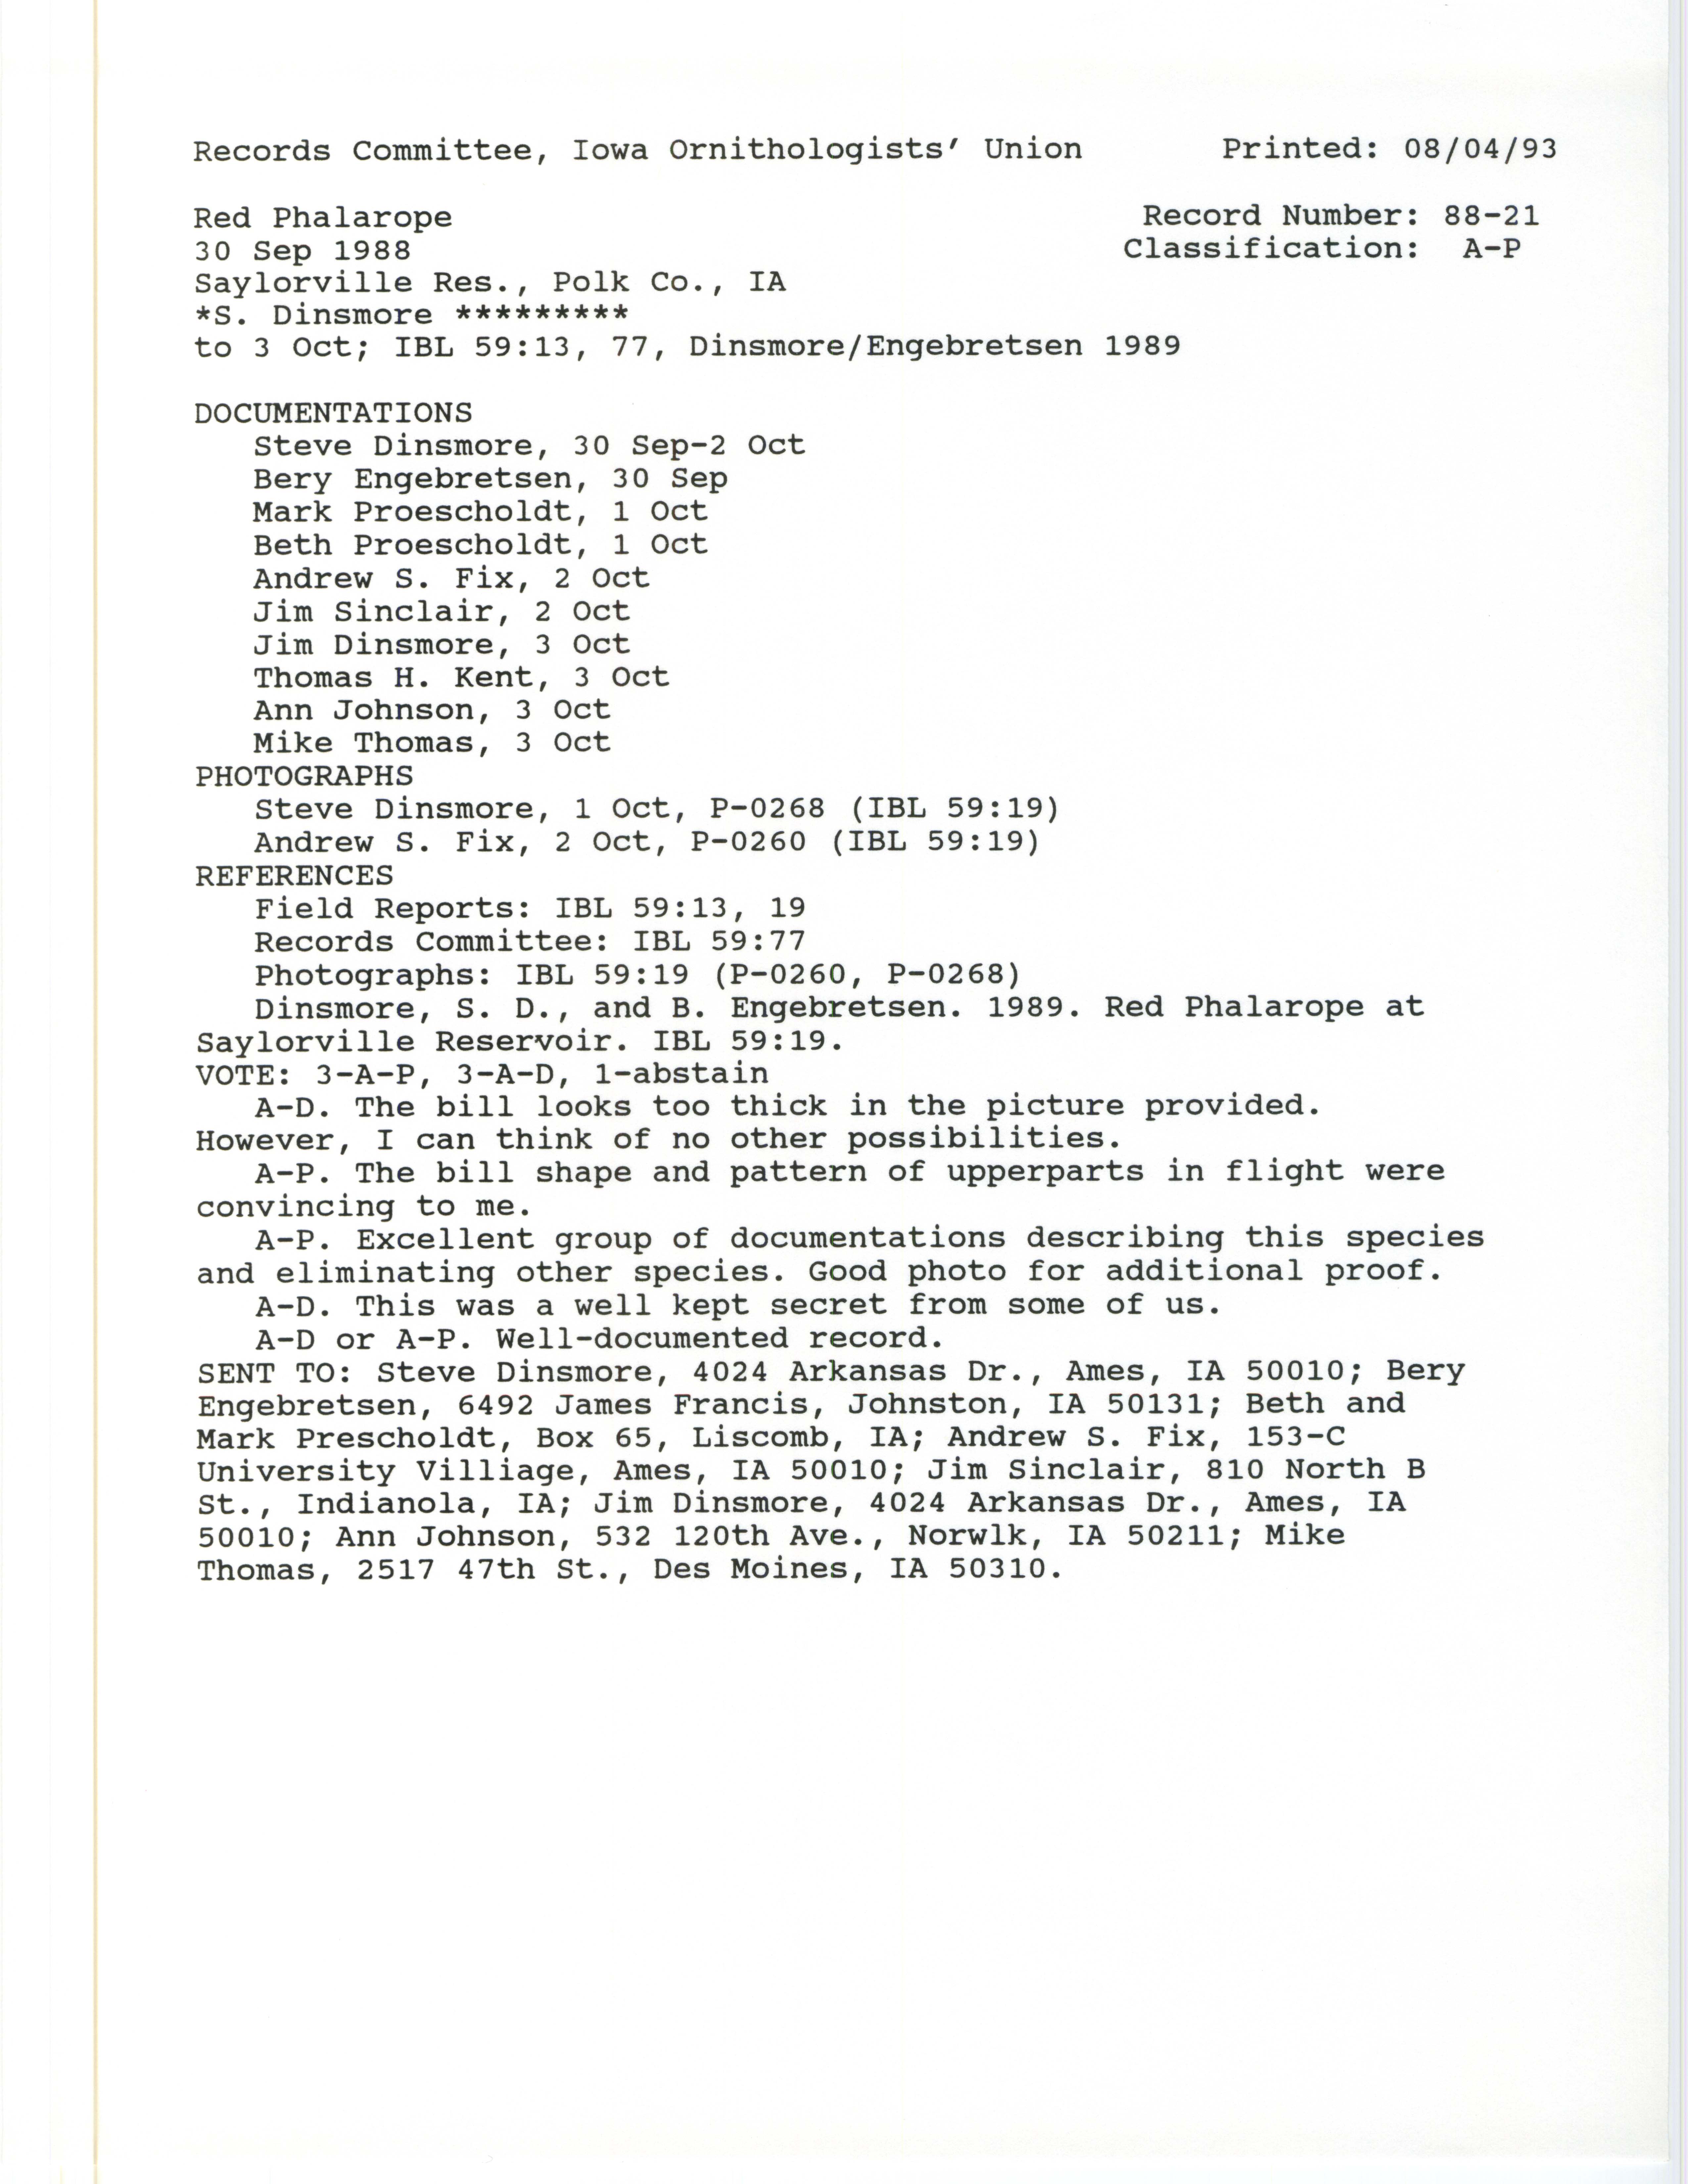 Records Committee review for rare bird sighting of Red Phalarope at Saylorville Reservoir, 1988